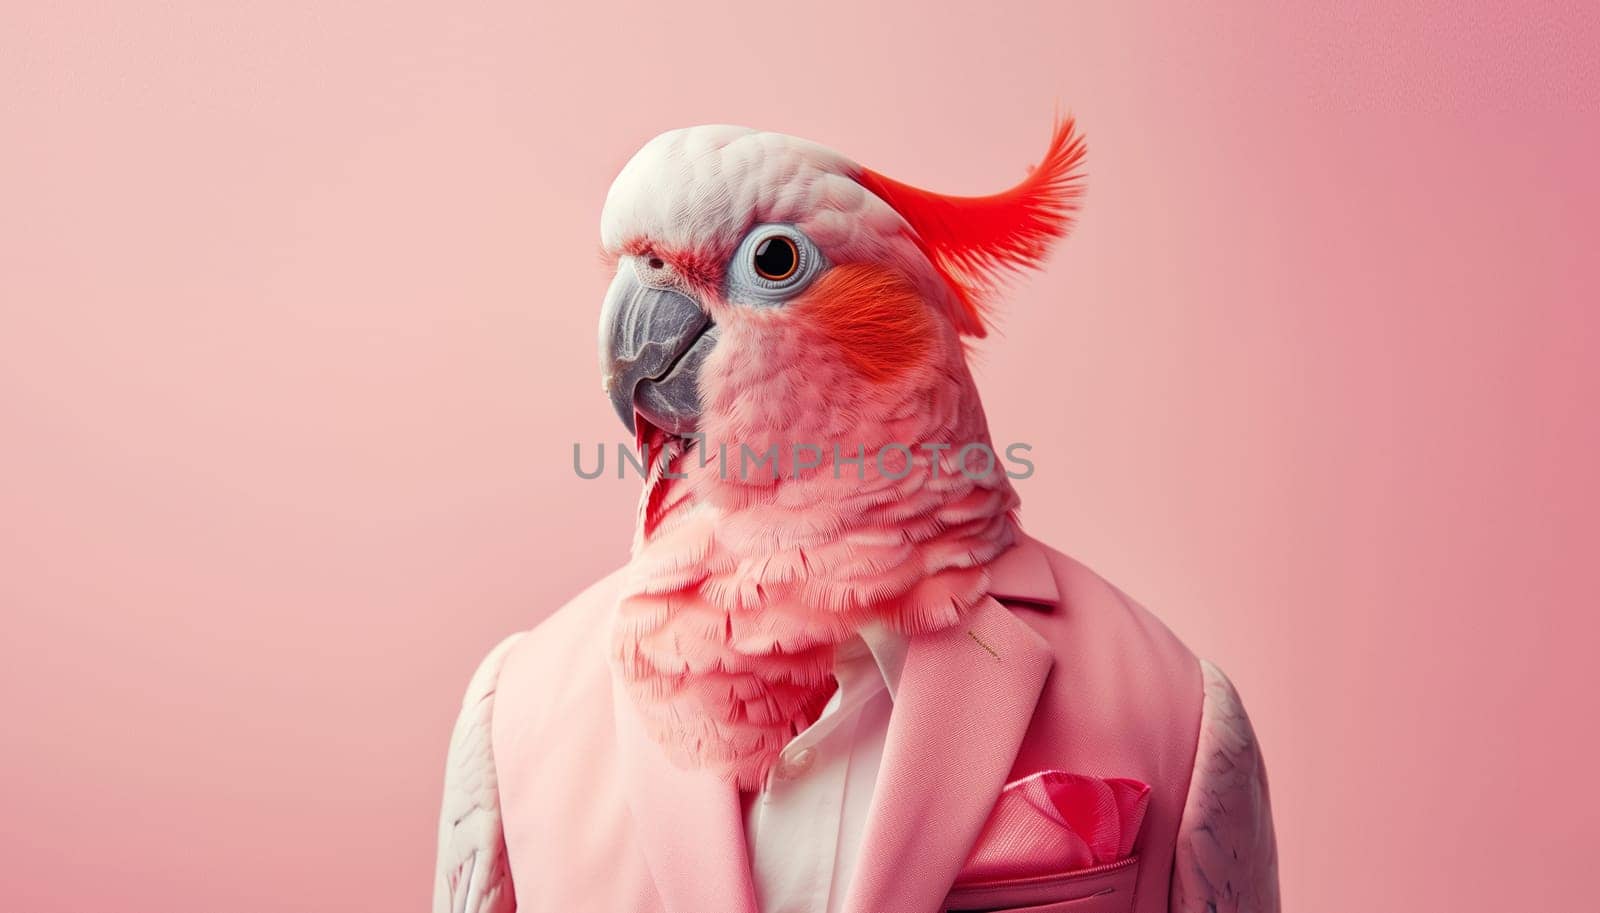 Stylish parrot bird in a suit looking at the camera on a pink background, animal, creative concept by Rohappy